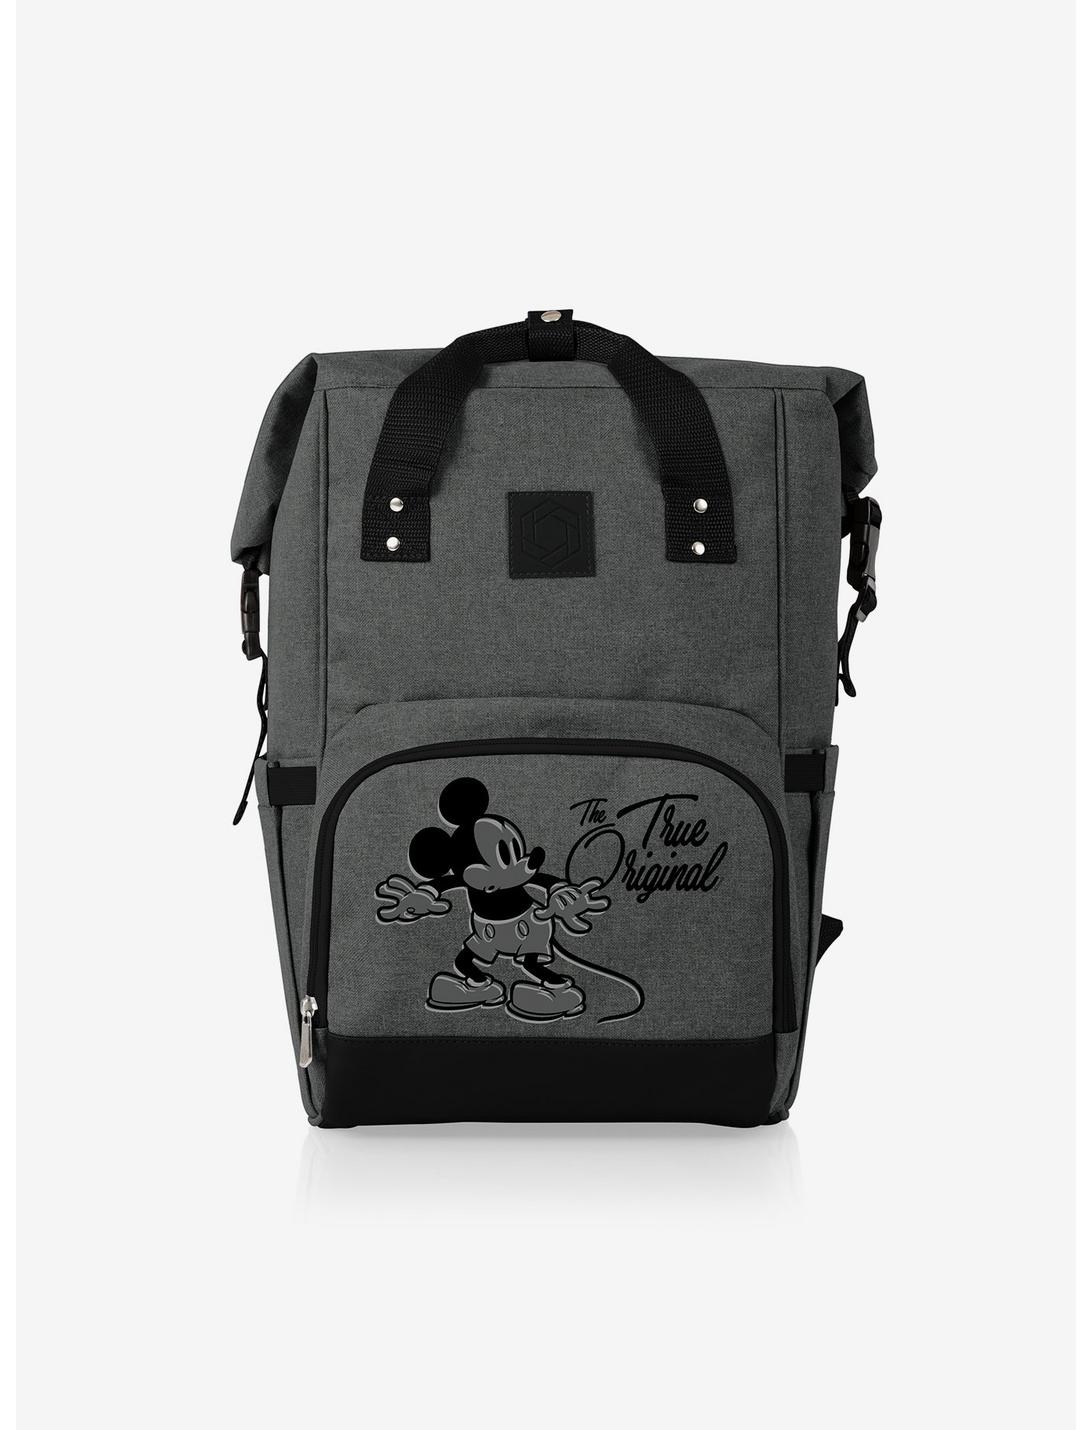 Disney Mickey Mouse RollTop Cooler Backpack, , hi-res